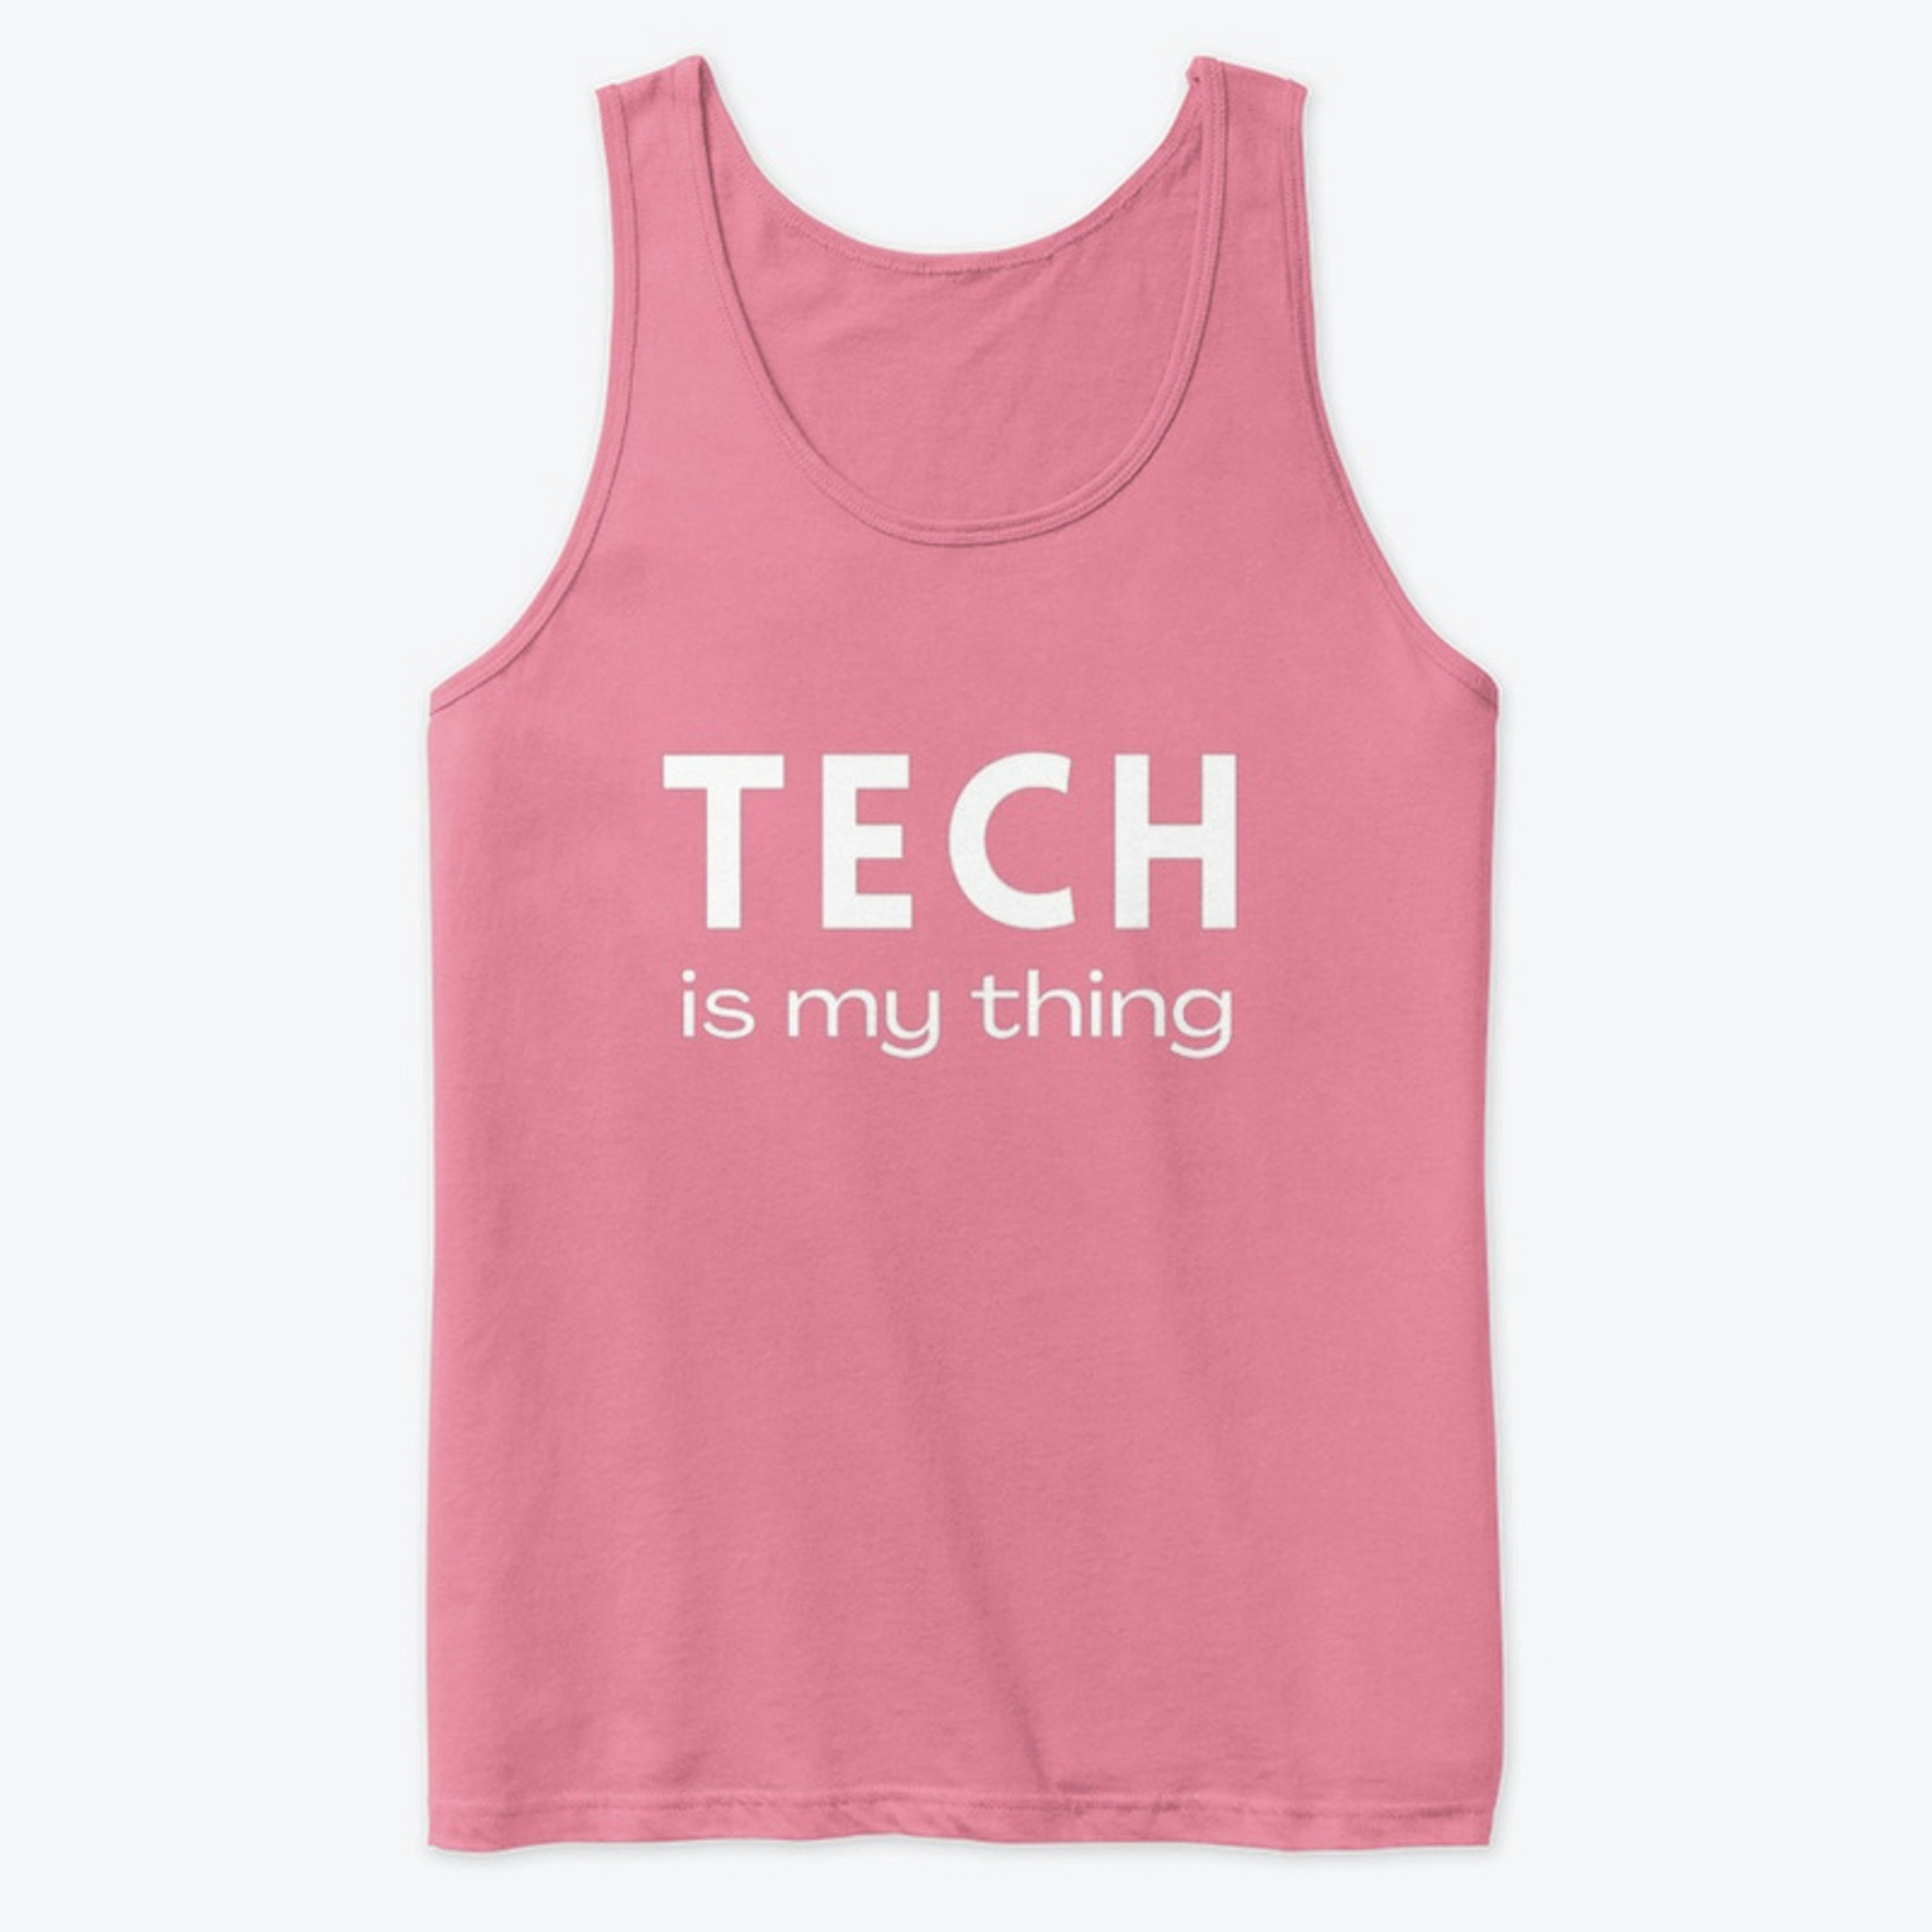 Tech is my thing